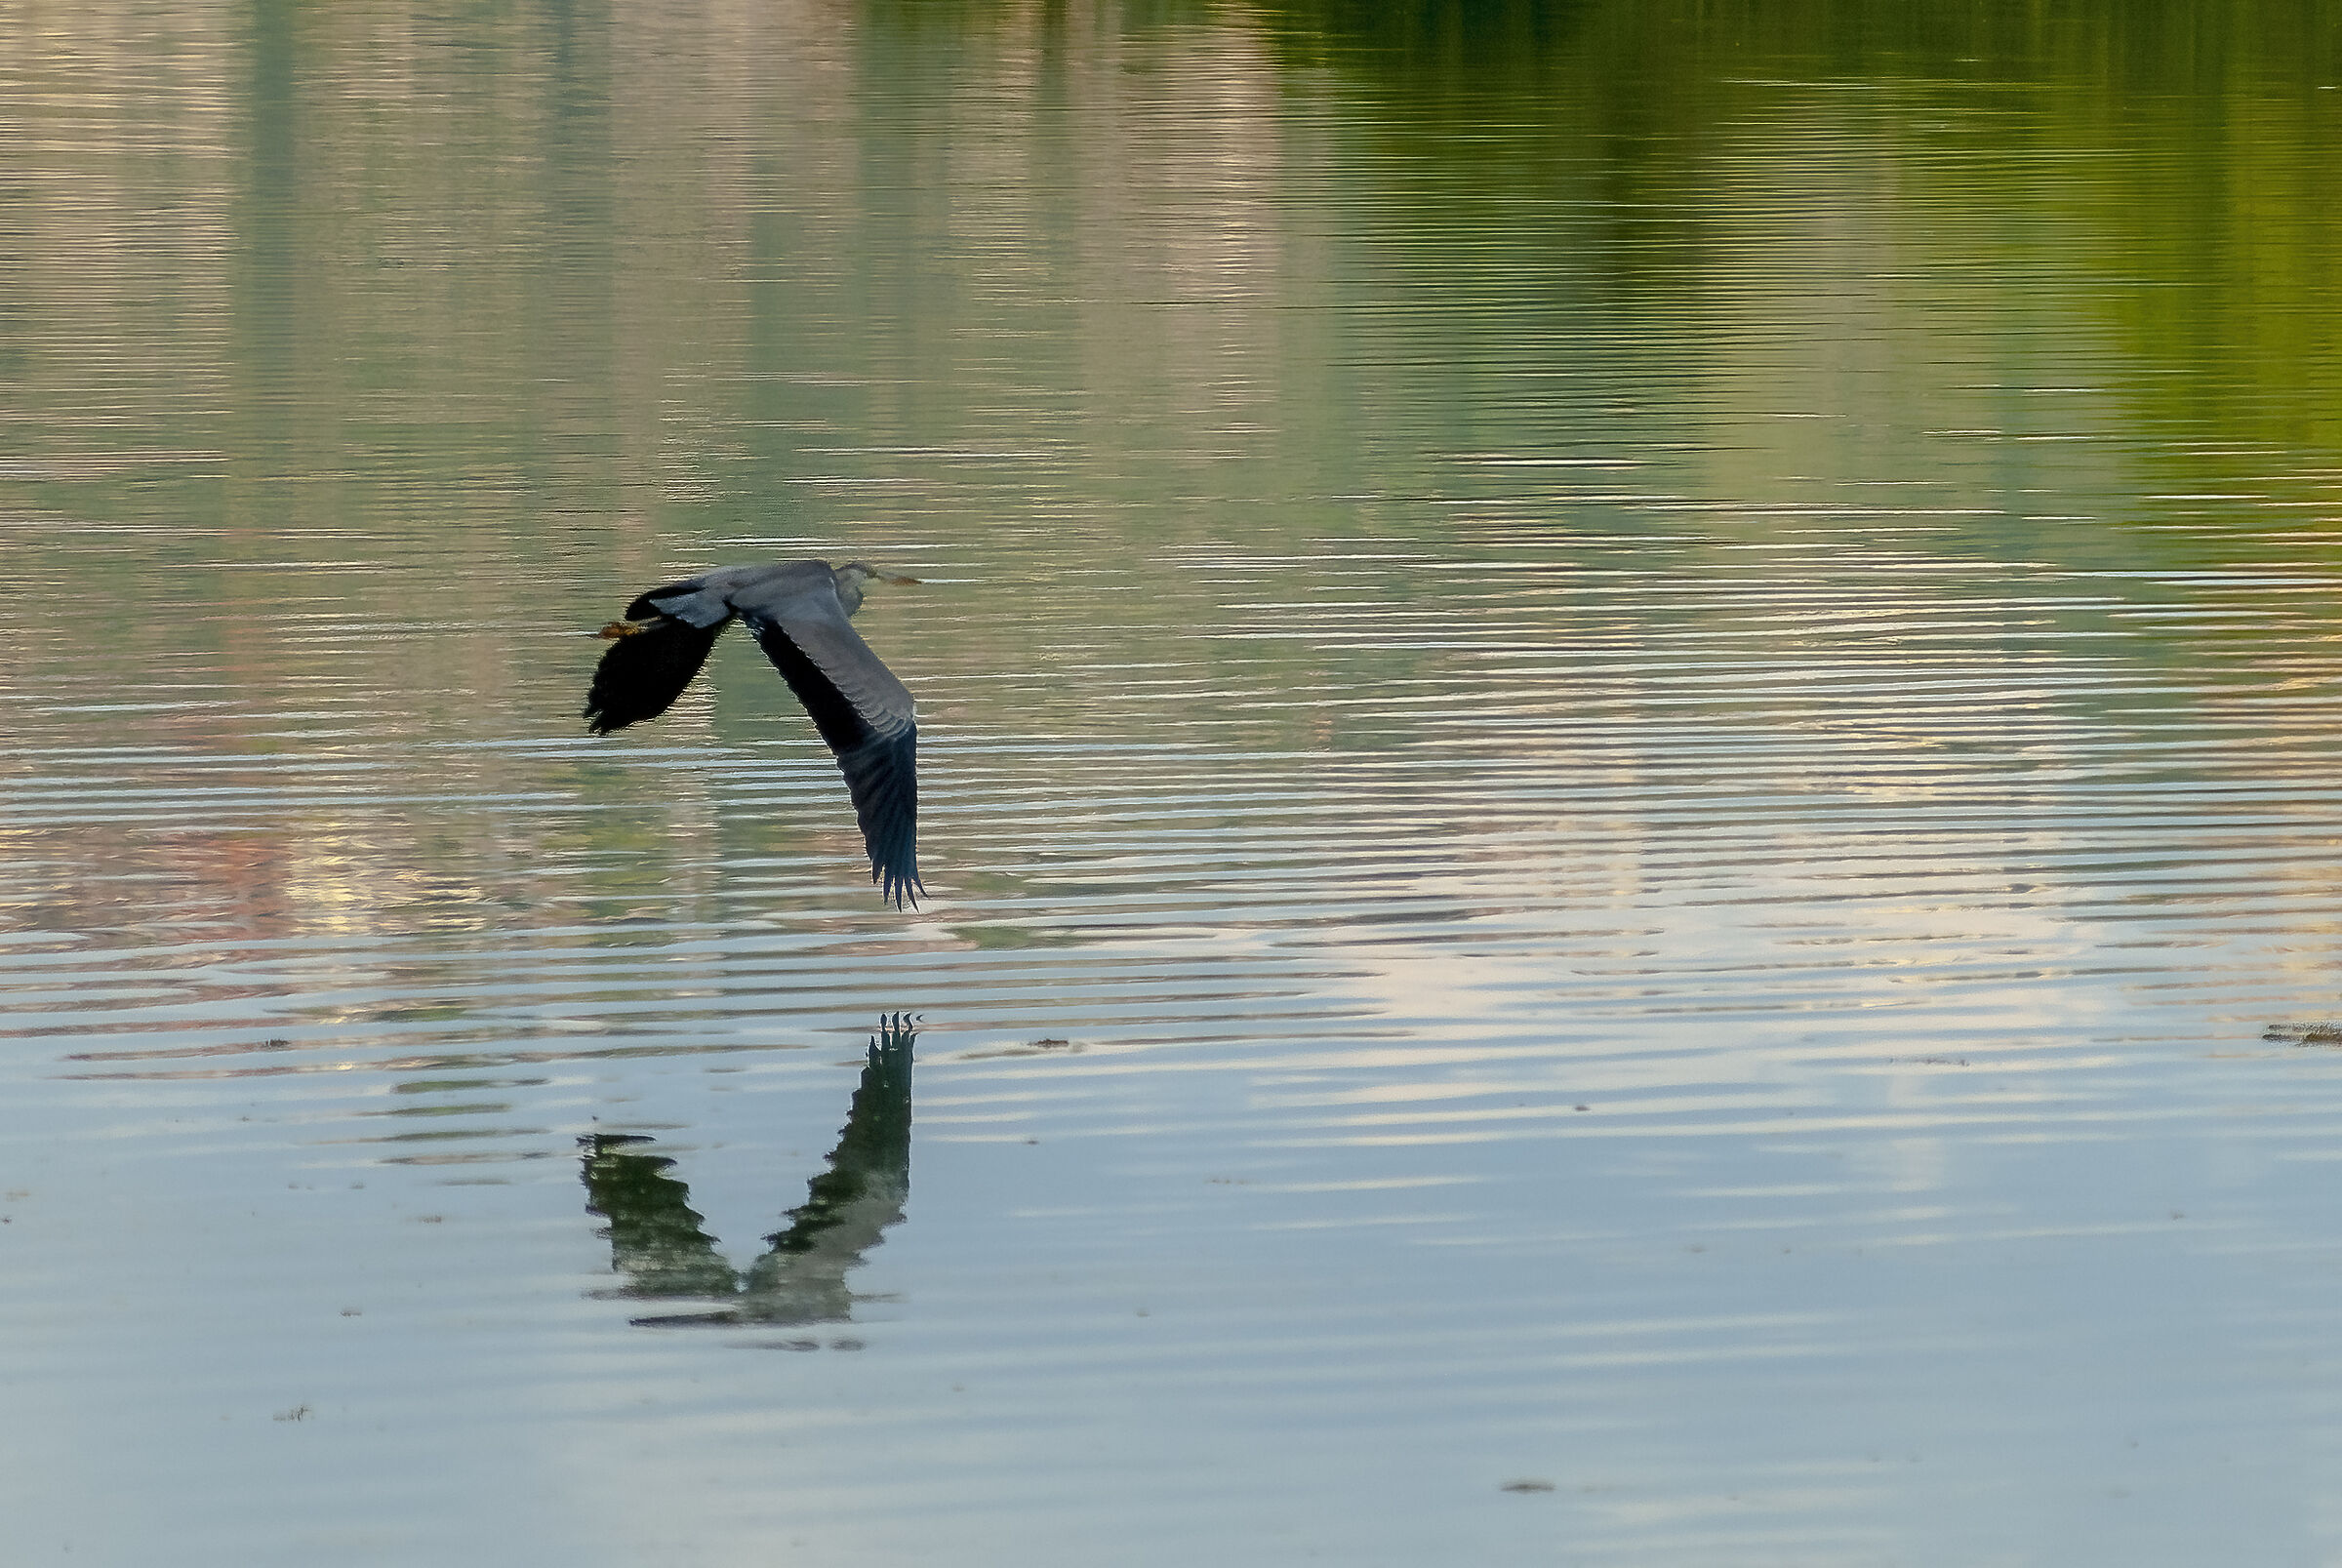 Grey heron on the water's surface...